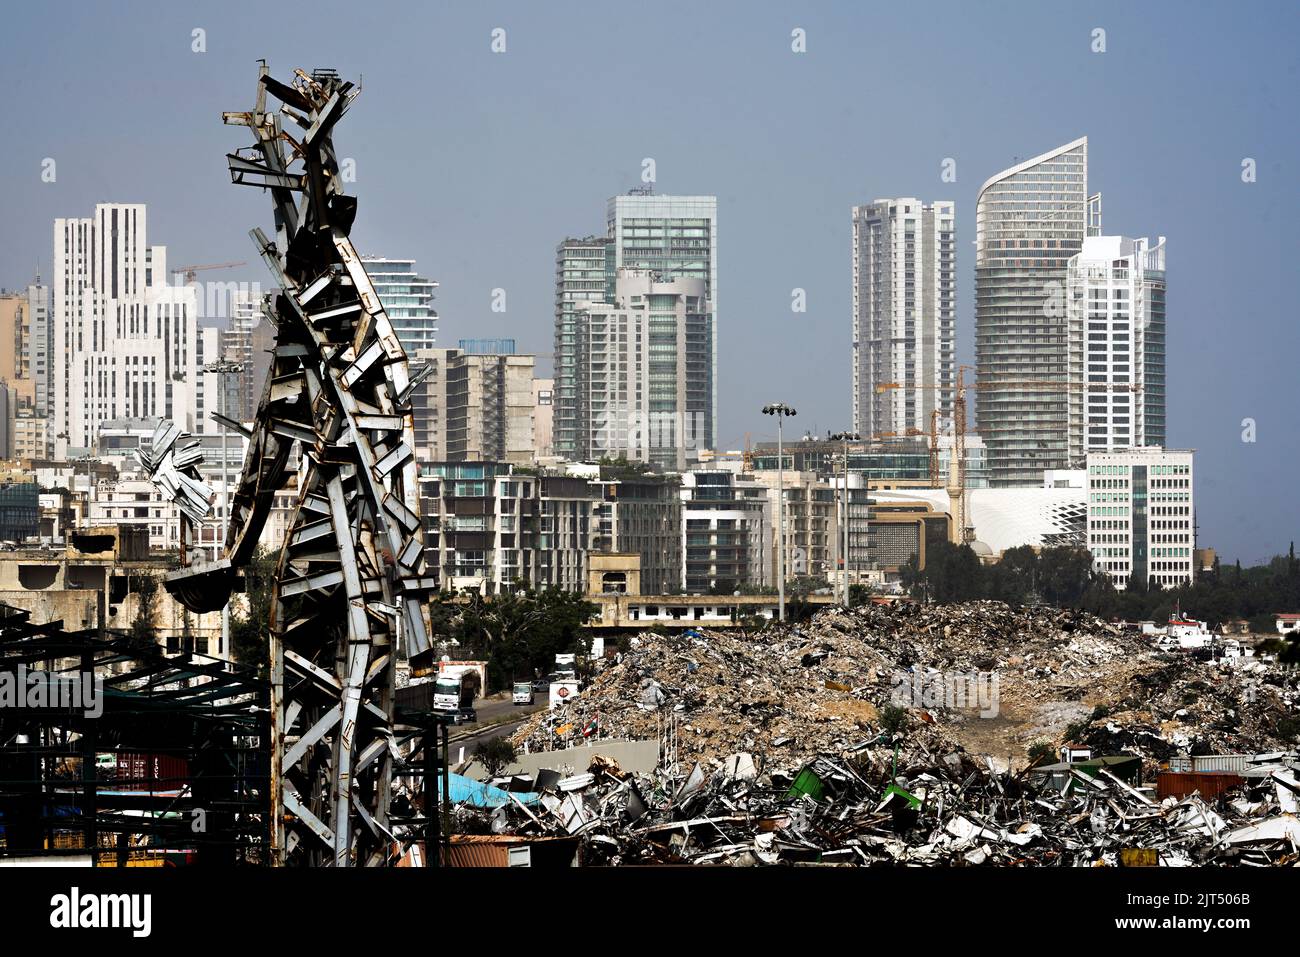 Beirut, Lebanon: Against the modern city's skyline stands artist Nadim Karam's steel sculpture commemorating the victims of the deadly 8/4/2020 explosion, made from the scrap metal from the massive explosion of 2,750 tons of ammonium nitrate stored in the port. Stock Photo